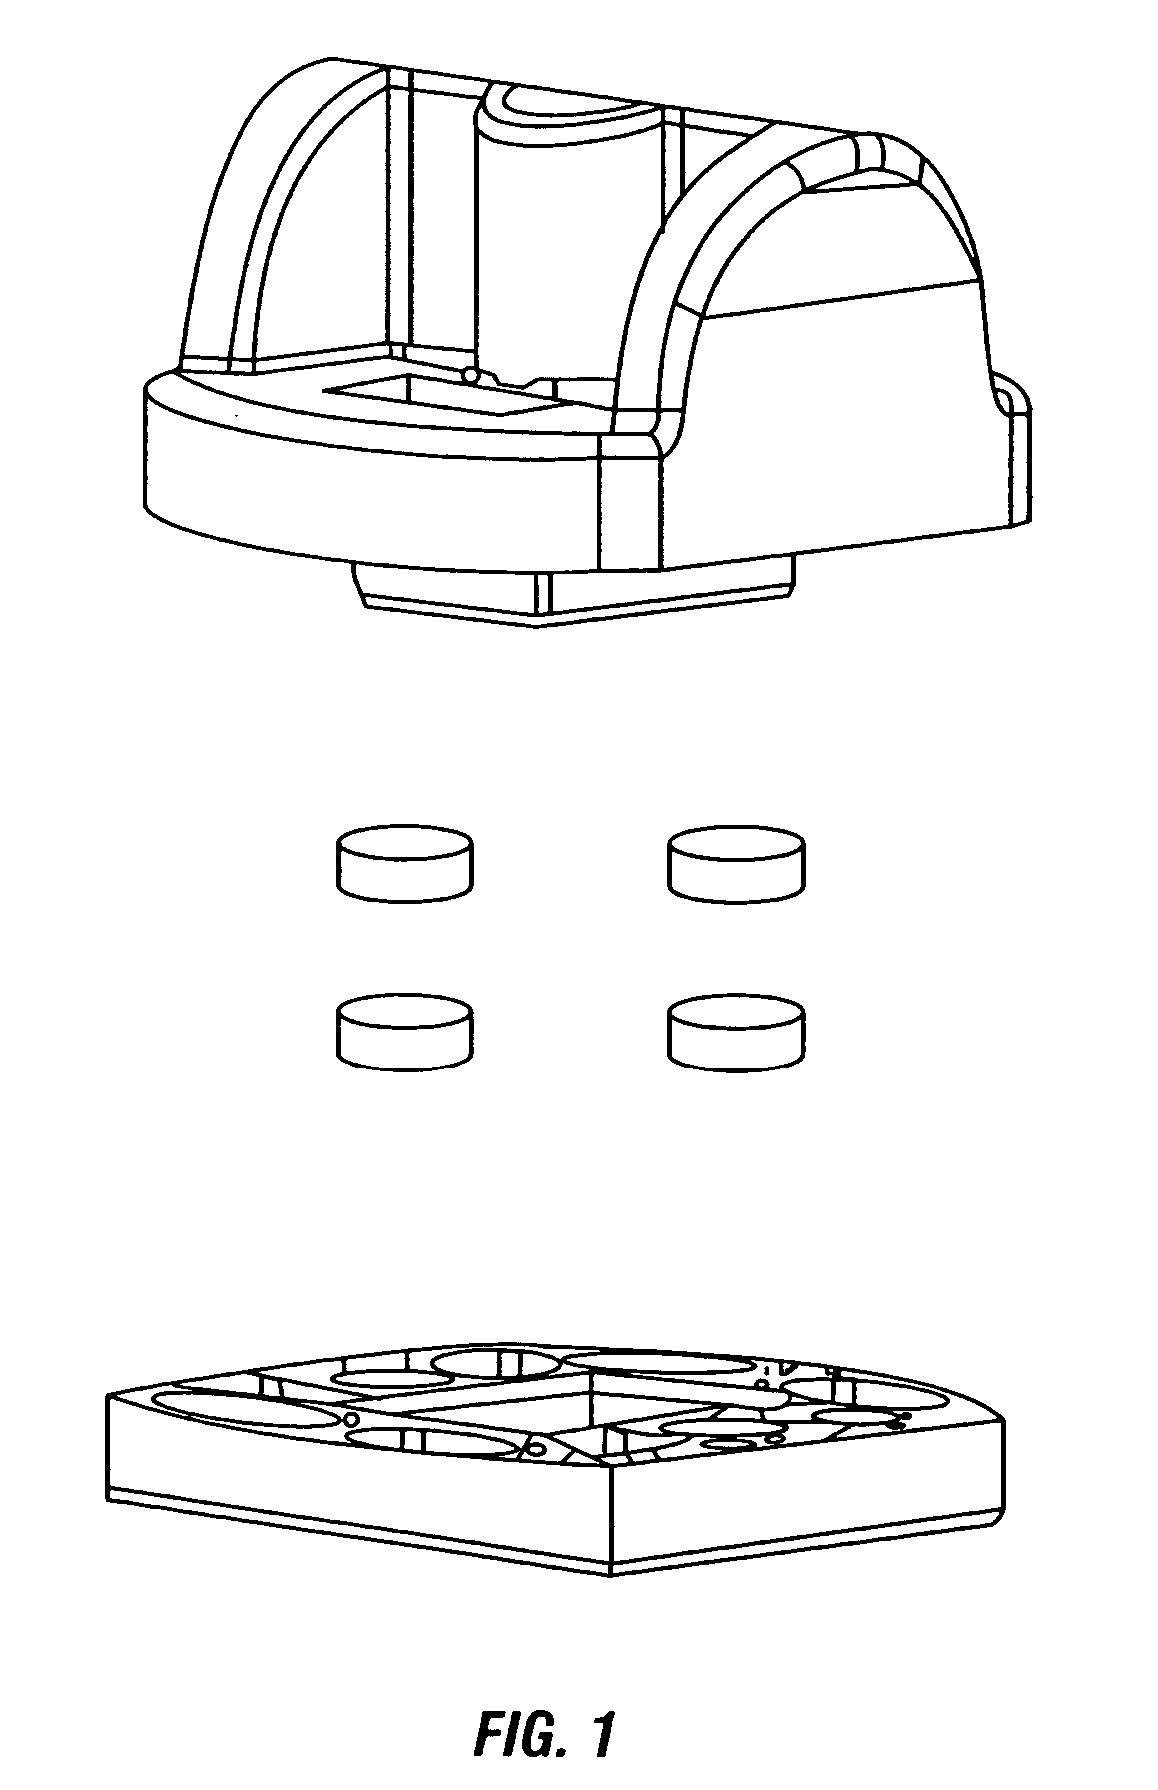 Method of sample control and calibration adjustment for use with a noninvasive analyzer